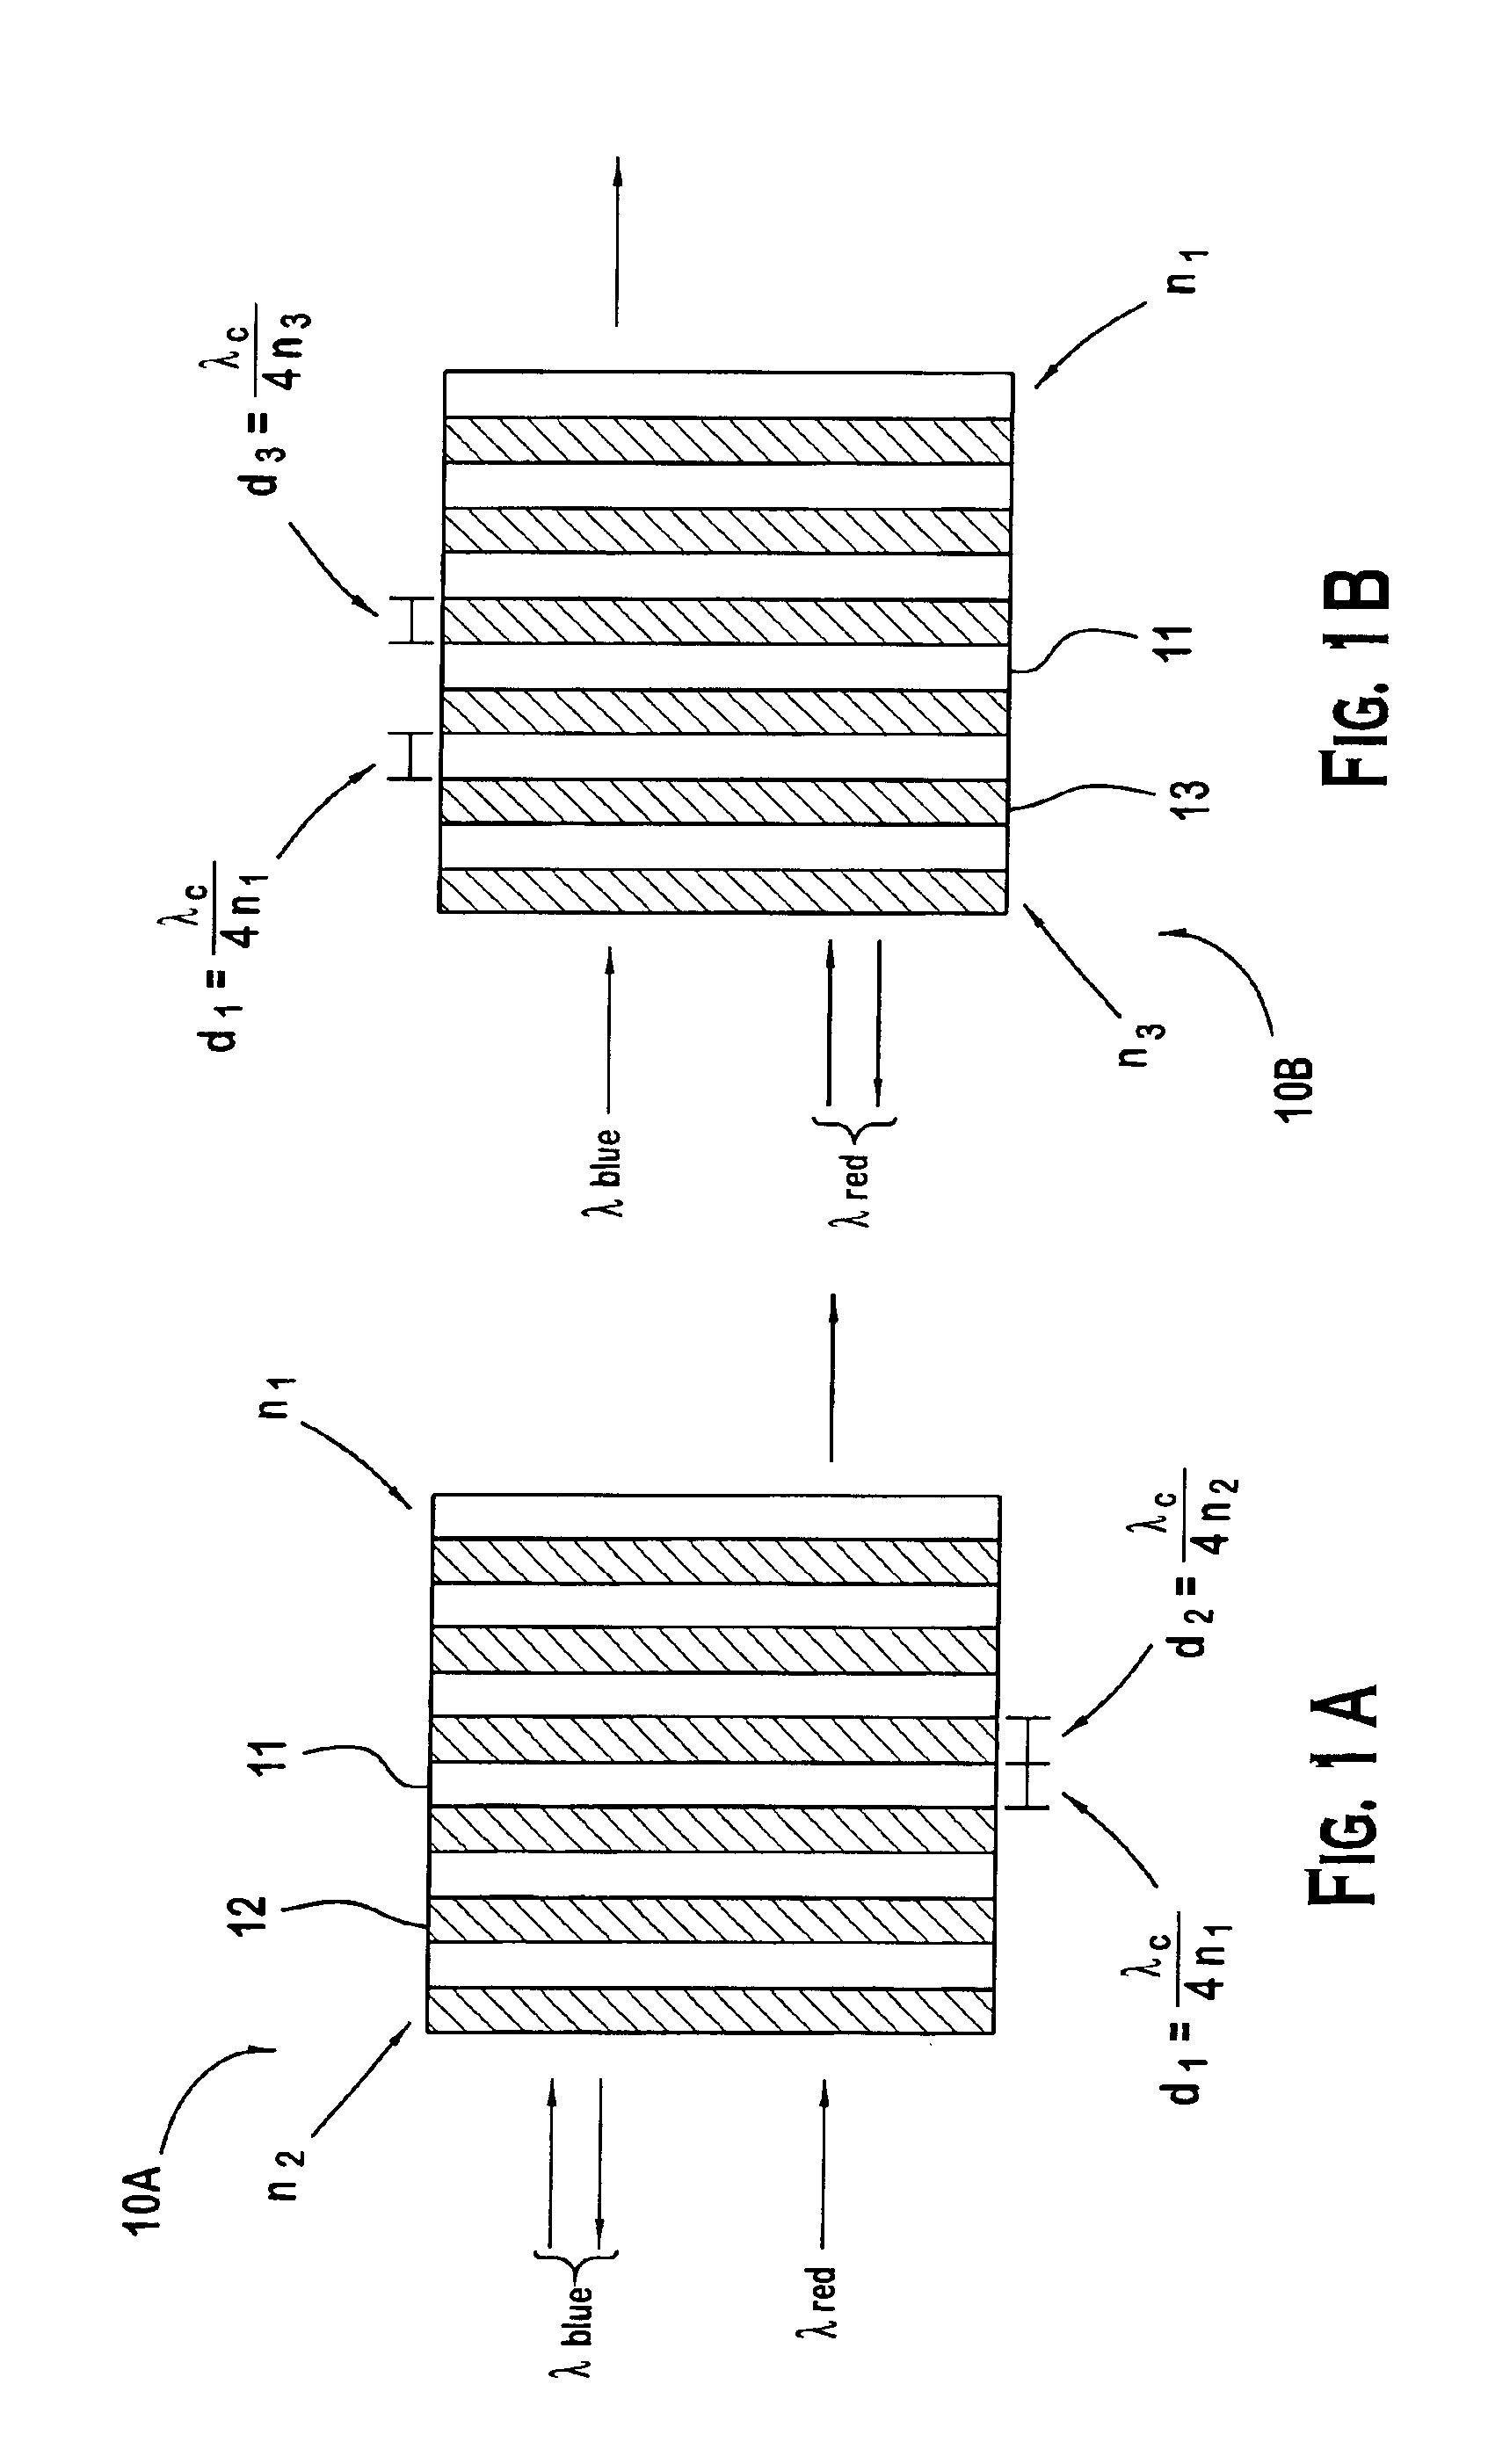 Non-linear photonic switch